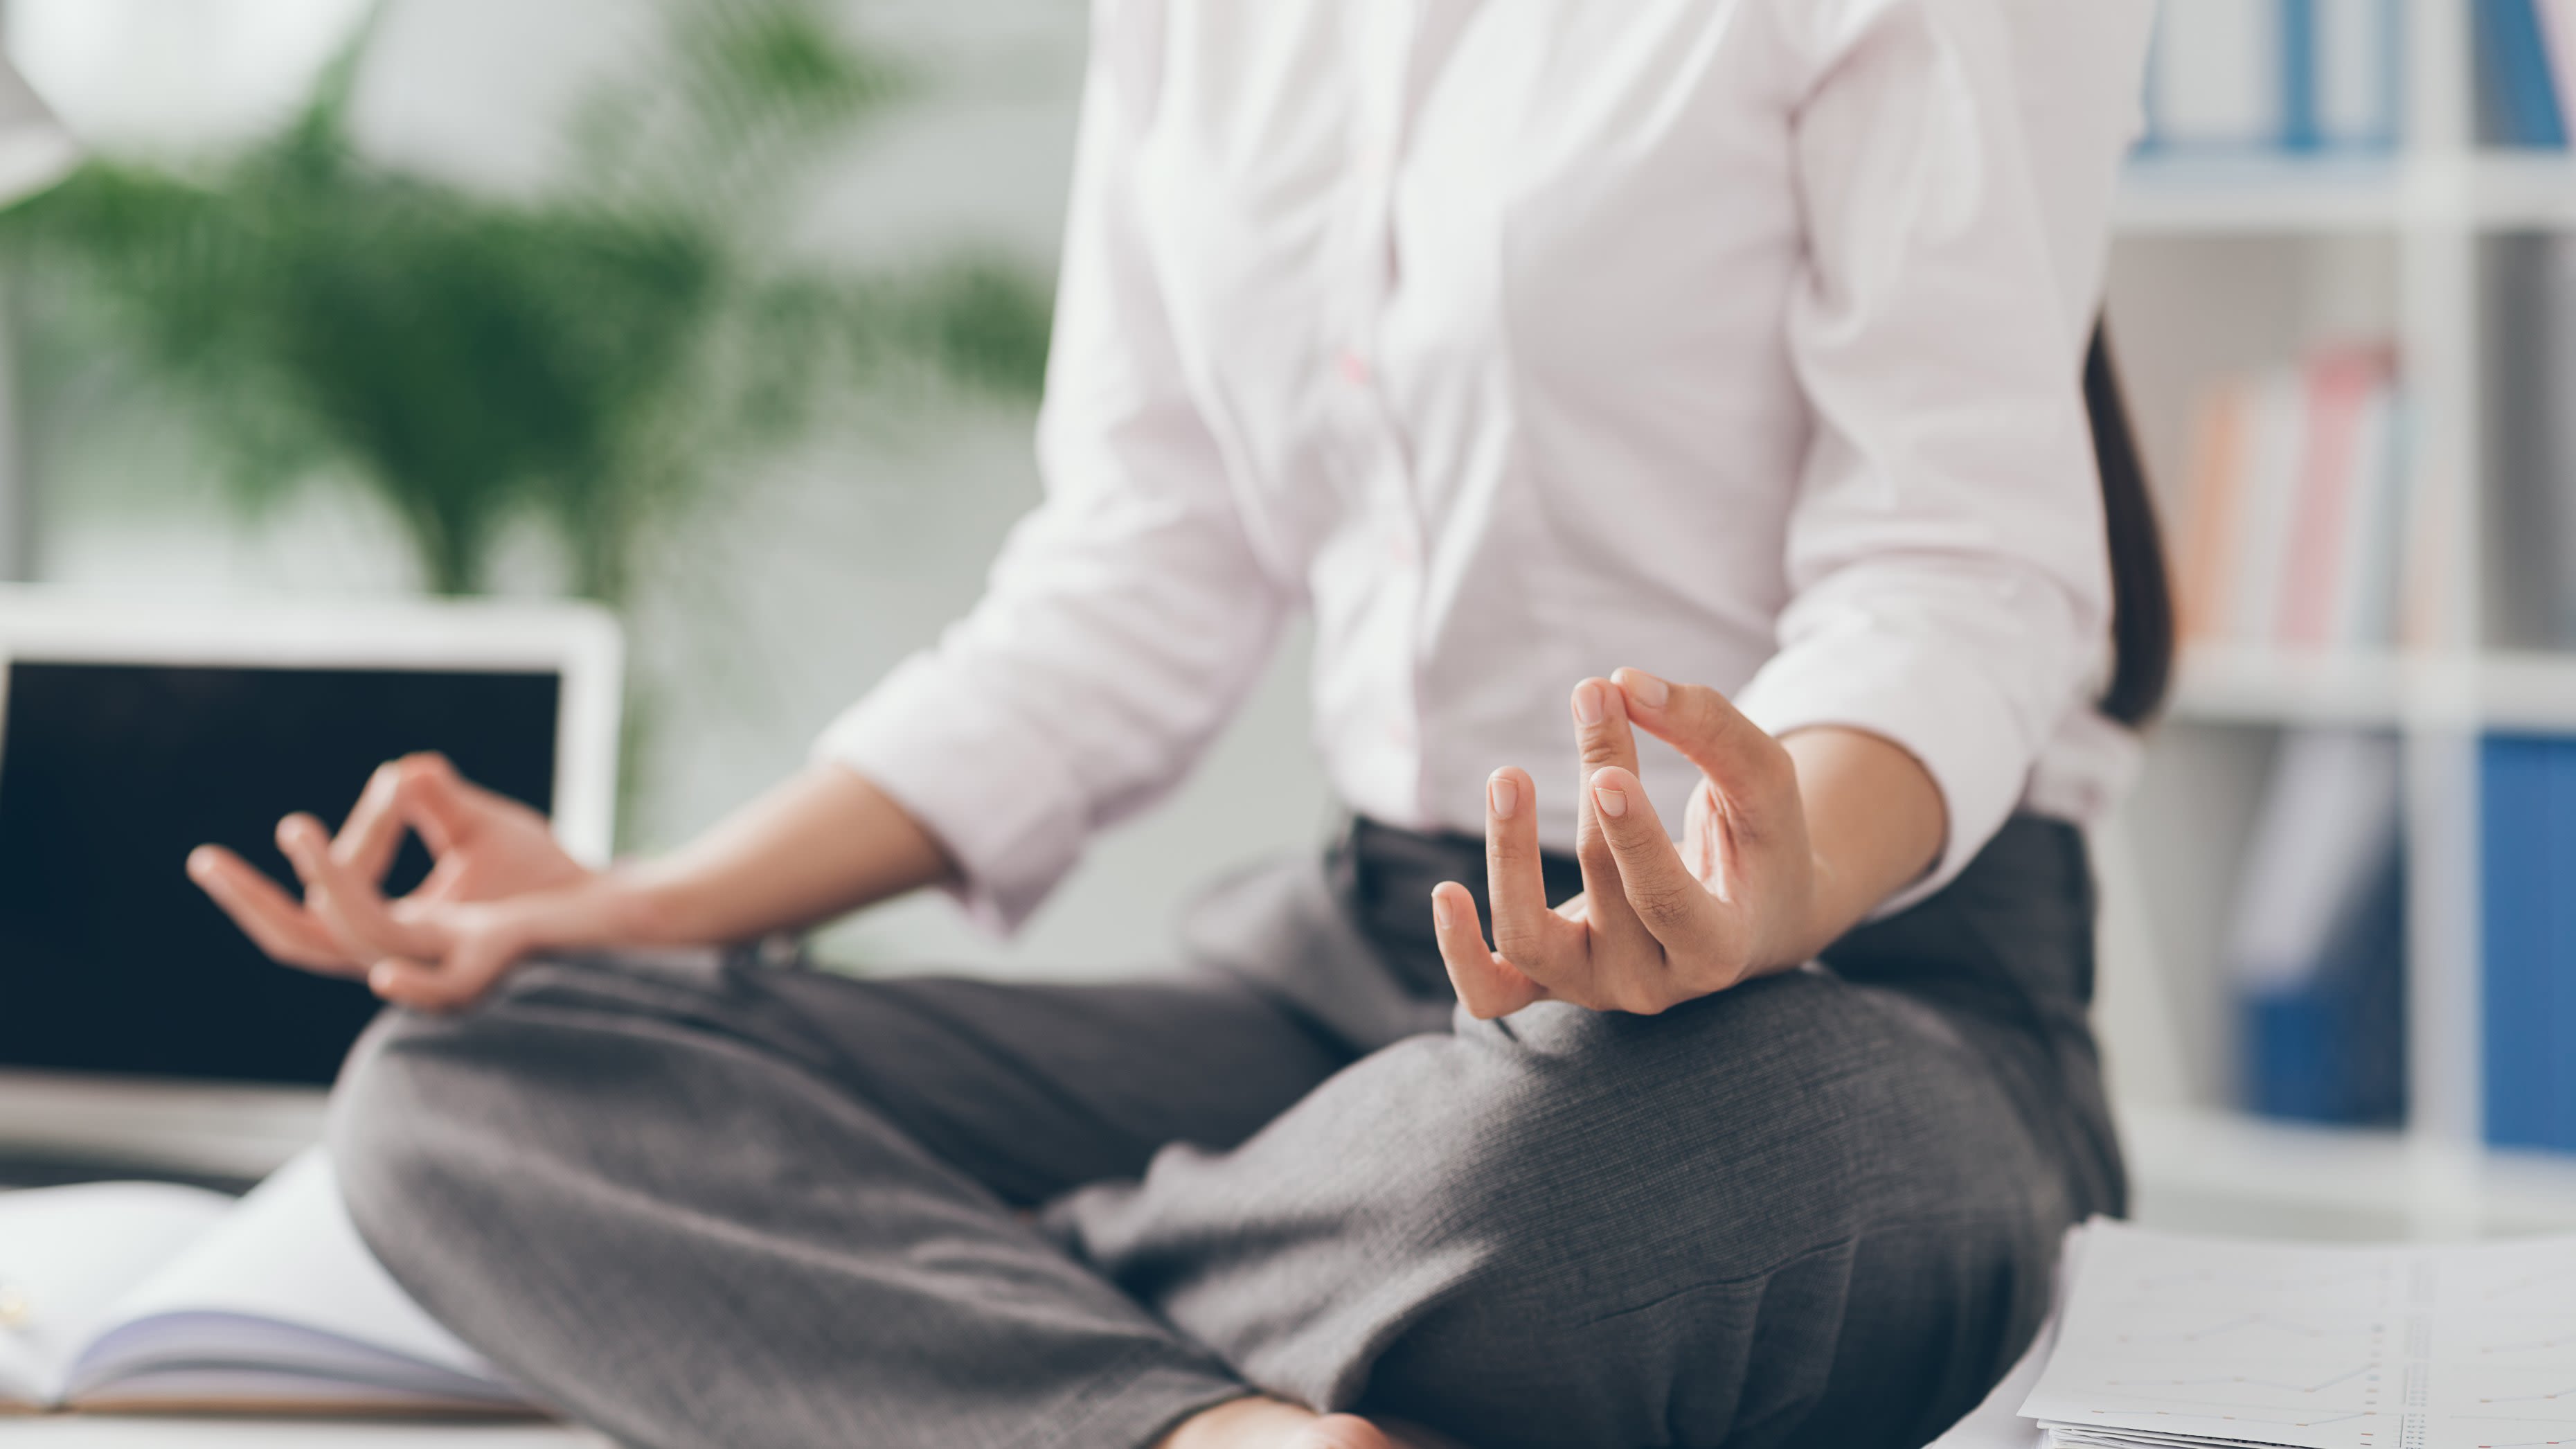 Office yoga Zen: 5 ways to focus and reduce stress